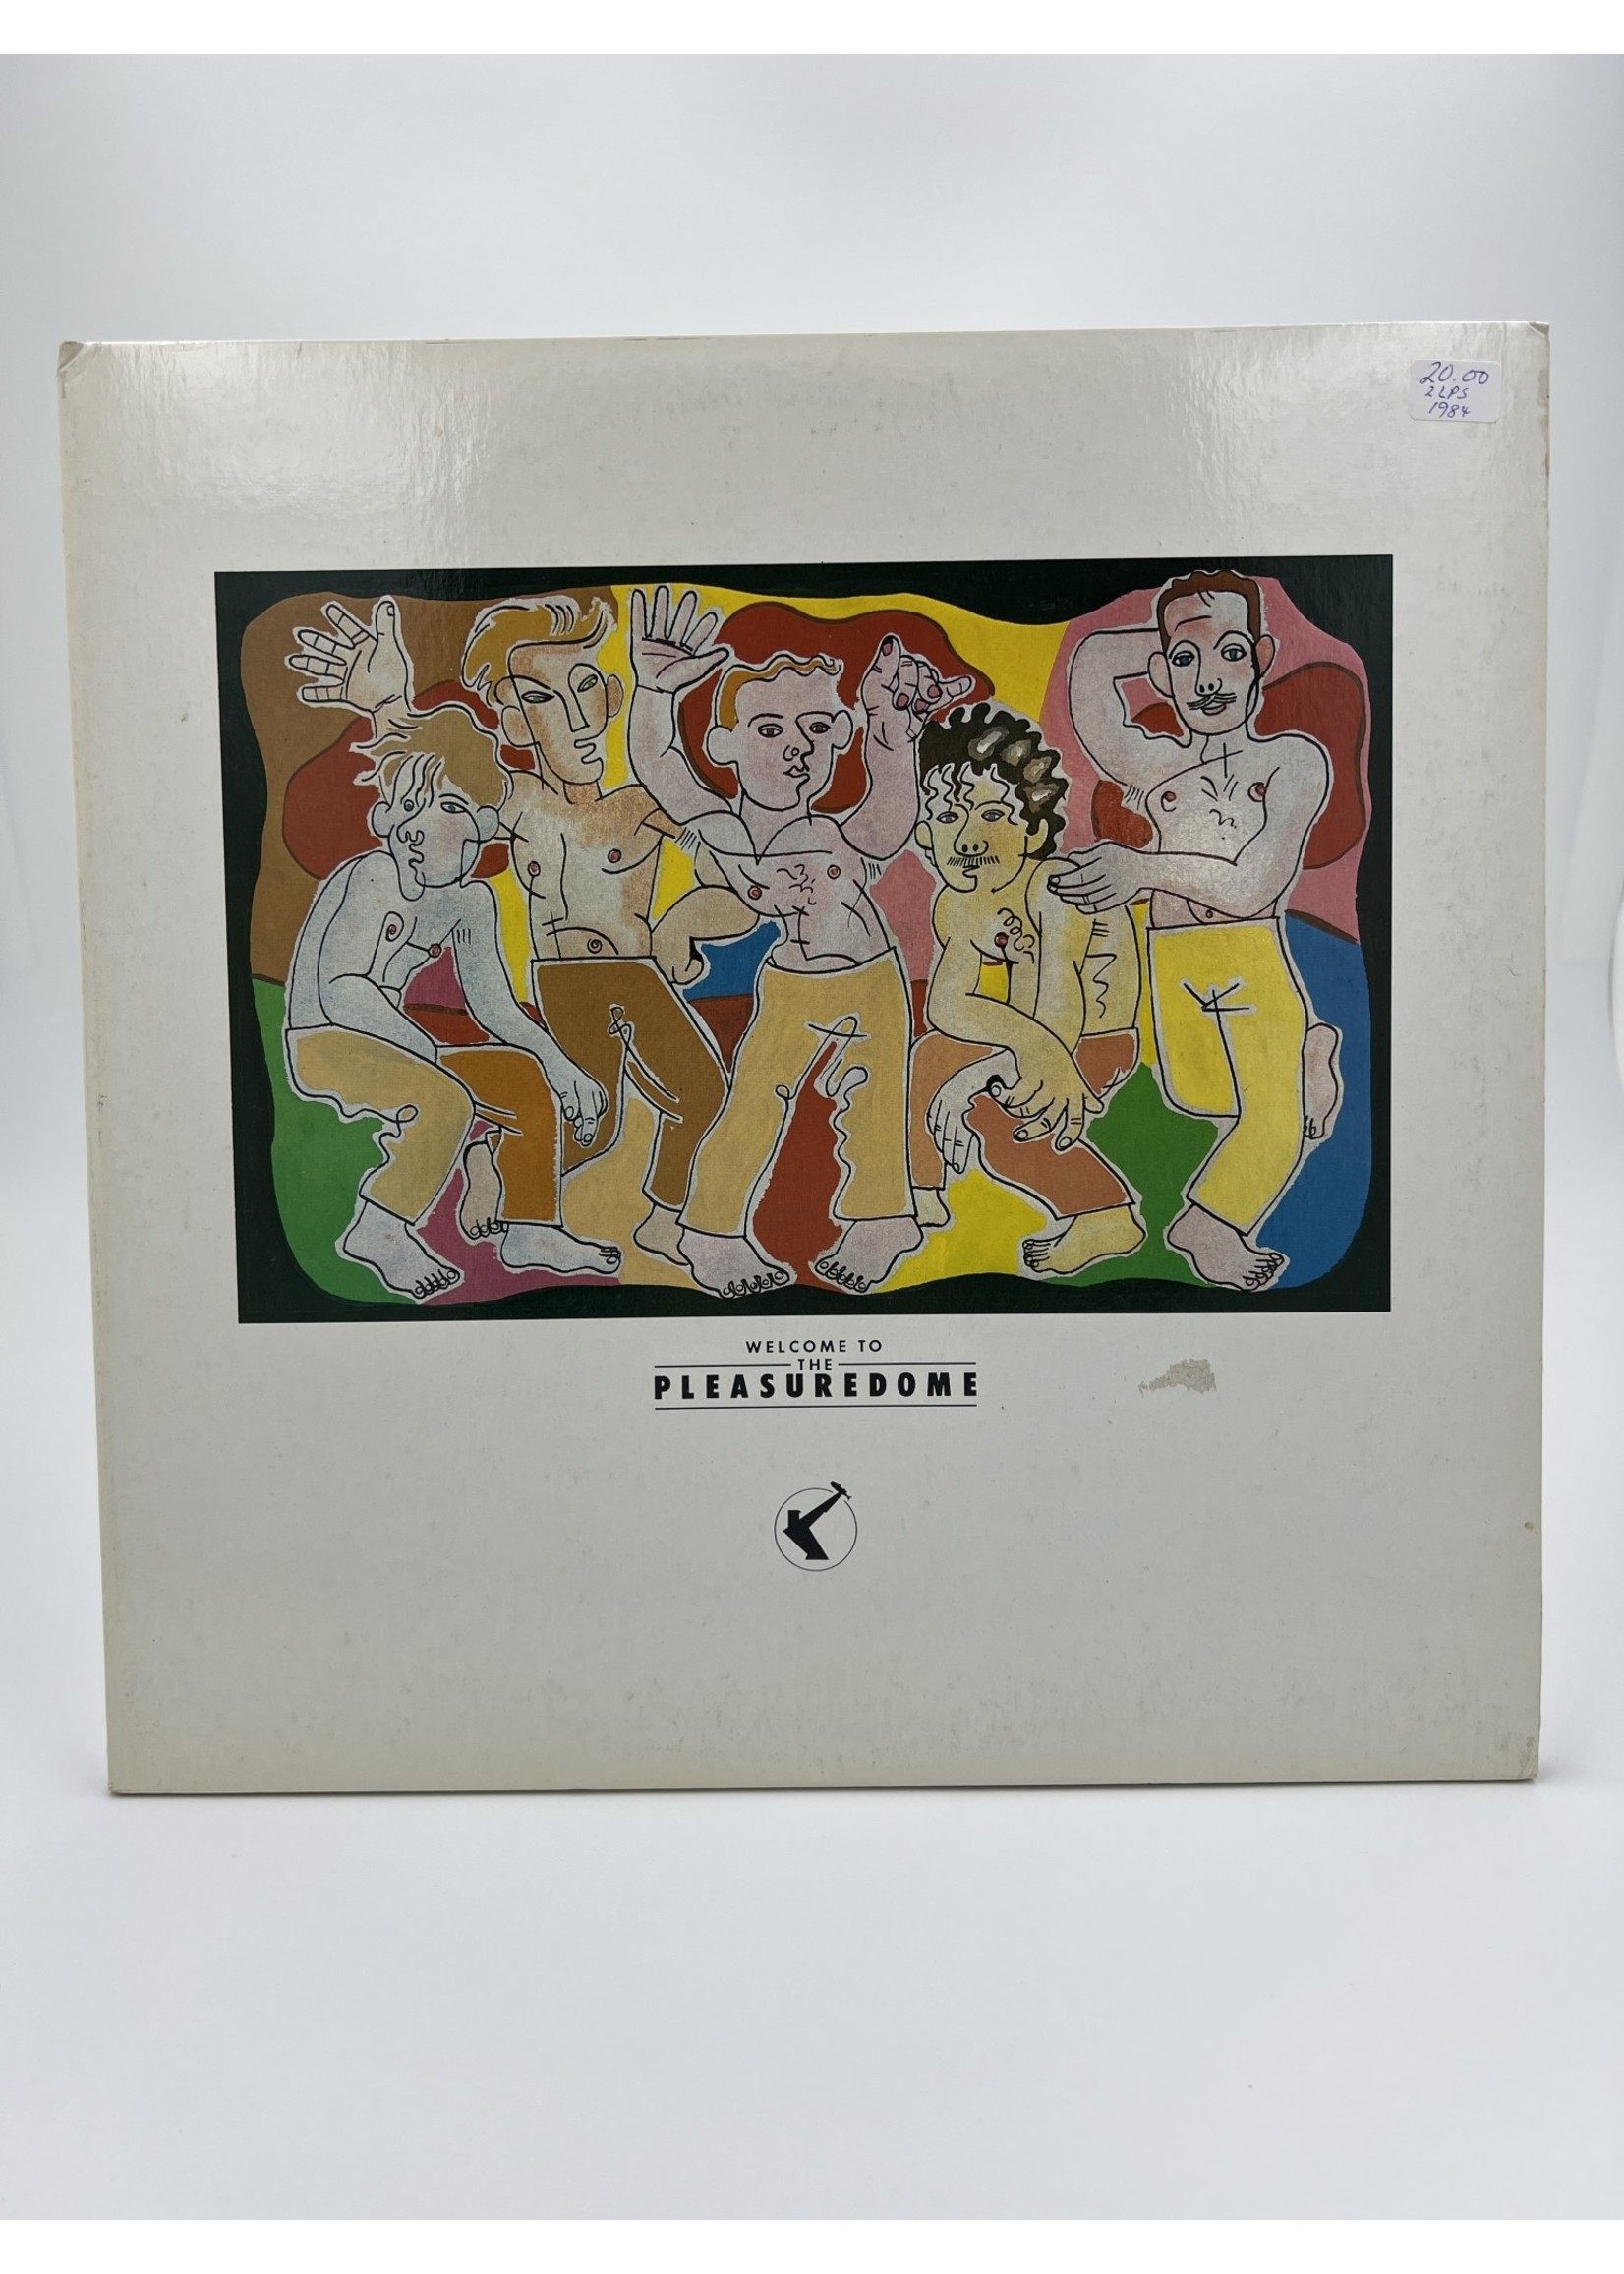 LP Frankie Goes To Hollywood Welcome To The Pleasuredome 2 Lp Record